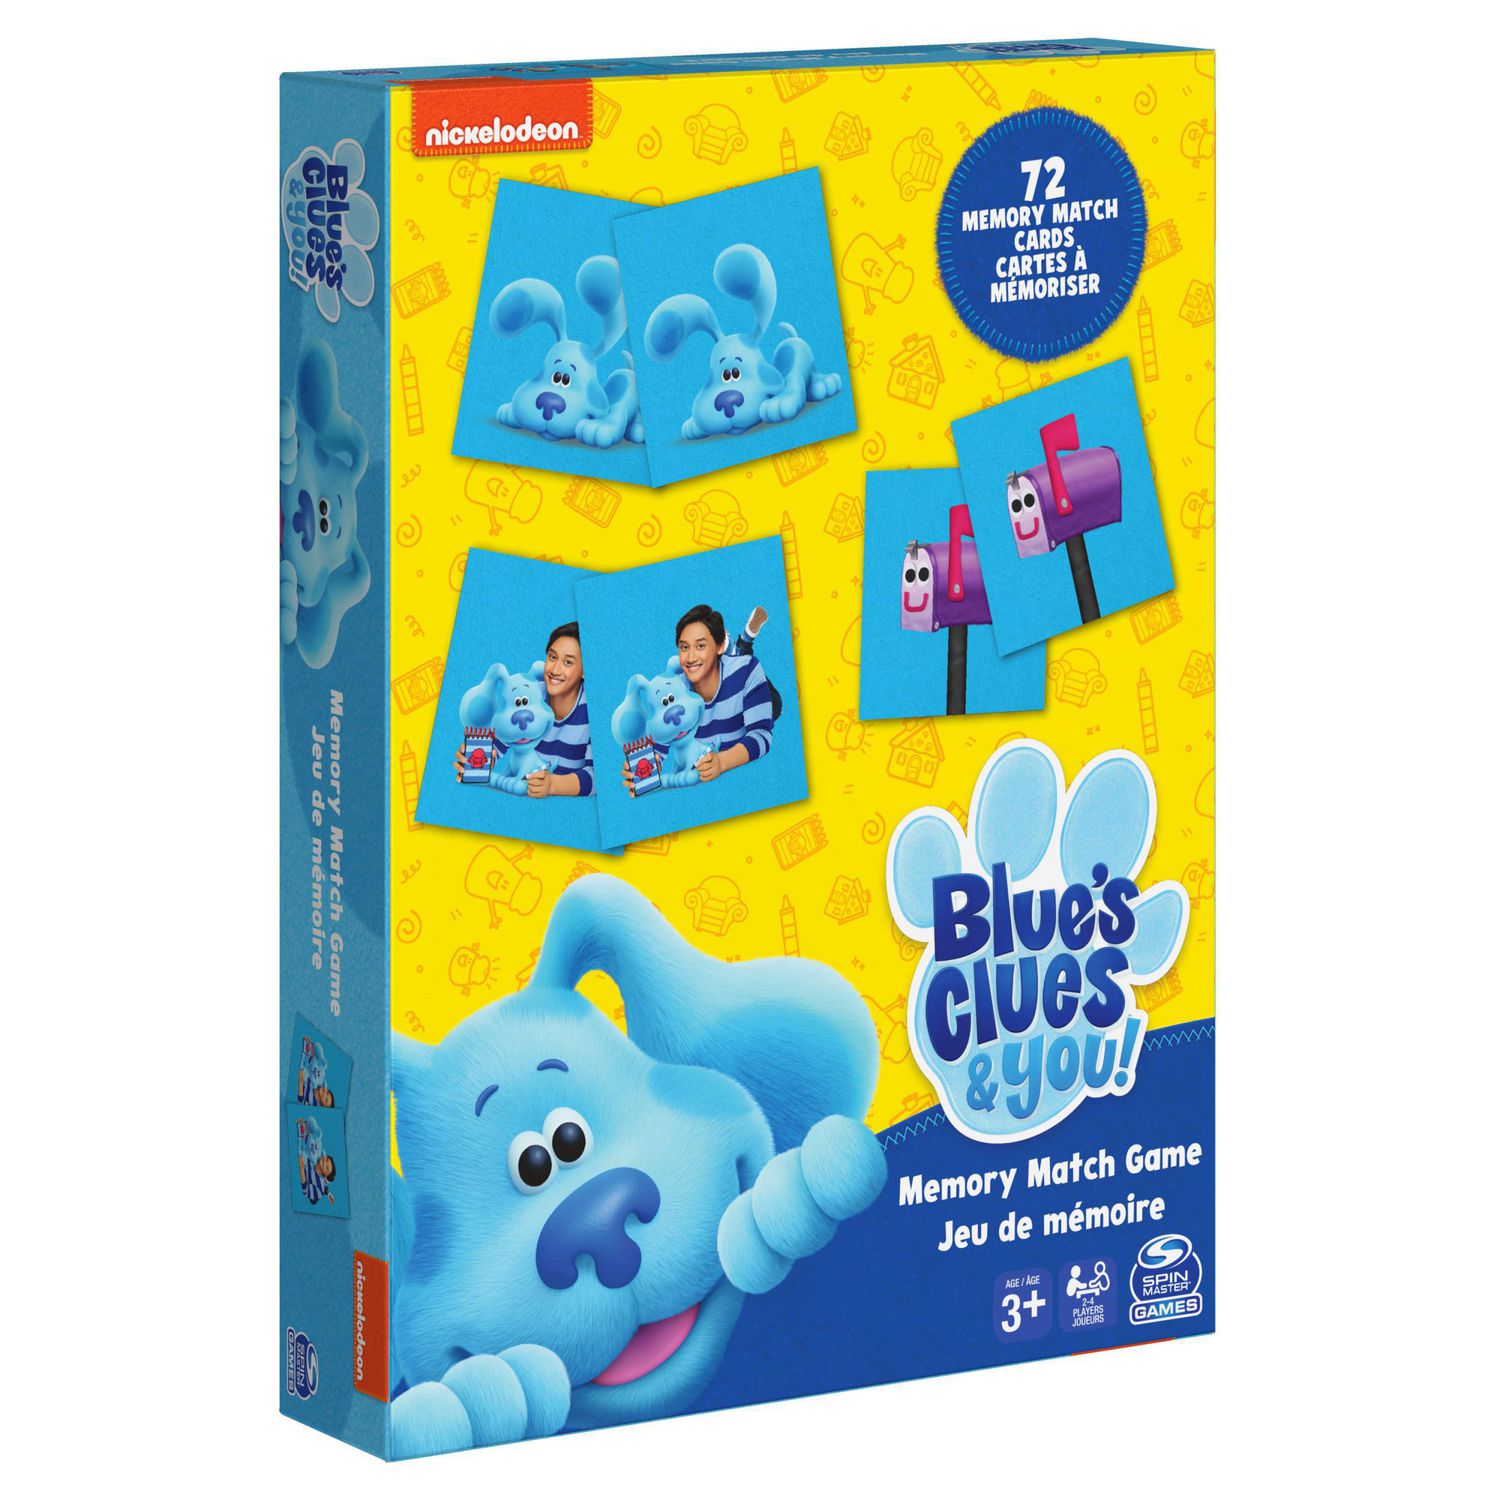 Blue's Clues Memory Match Game, for Families and Kids Ages 3 and up